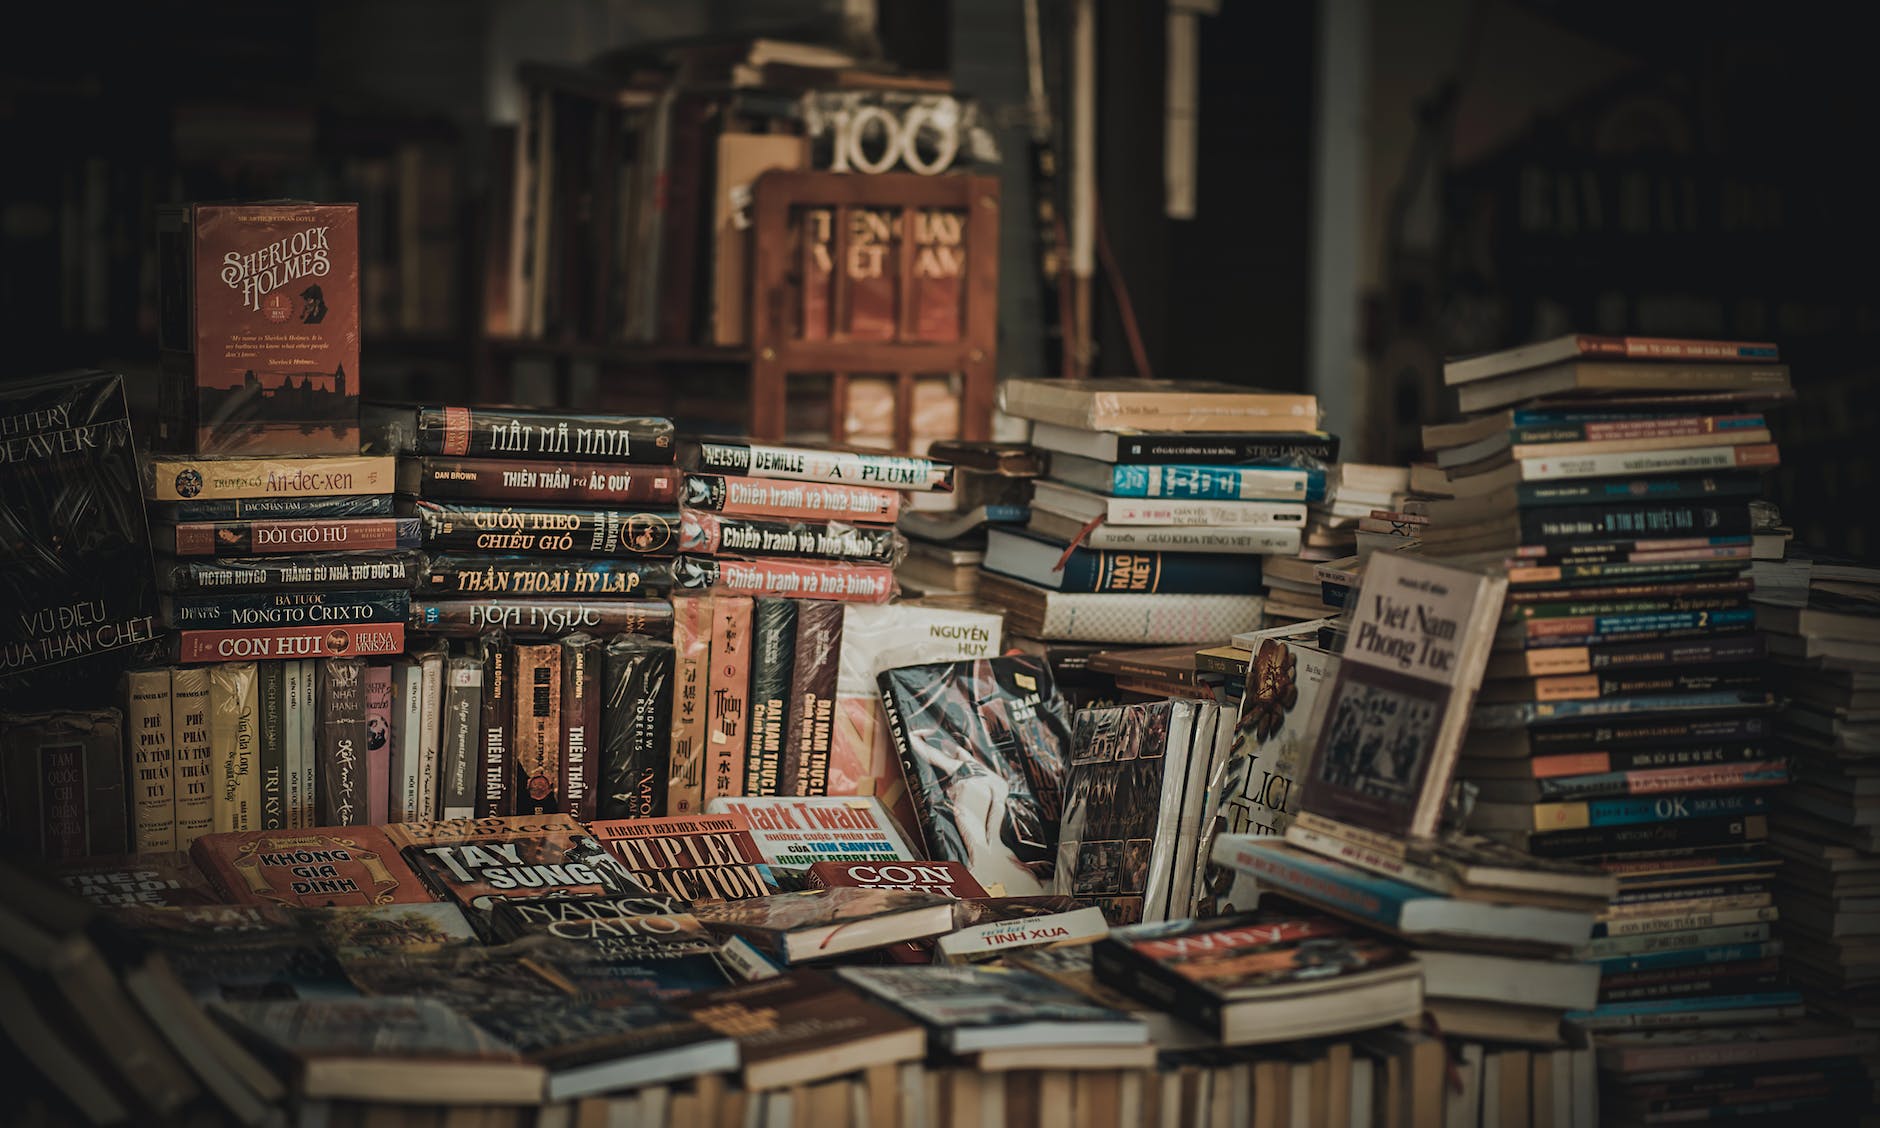 This is a close up of a tumbled pile of books, it could be from a market stall or maybe from within a second hand book store. The image colouring is sepia with light highlighting the centre of the image